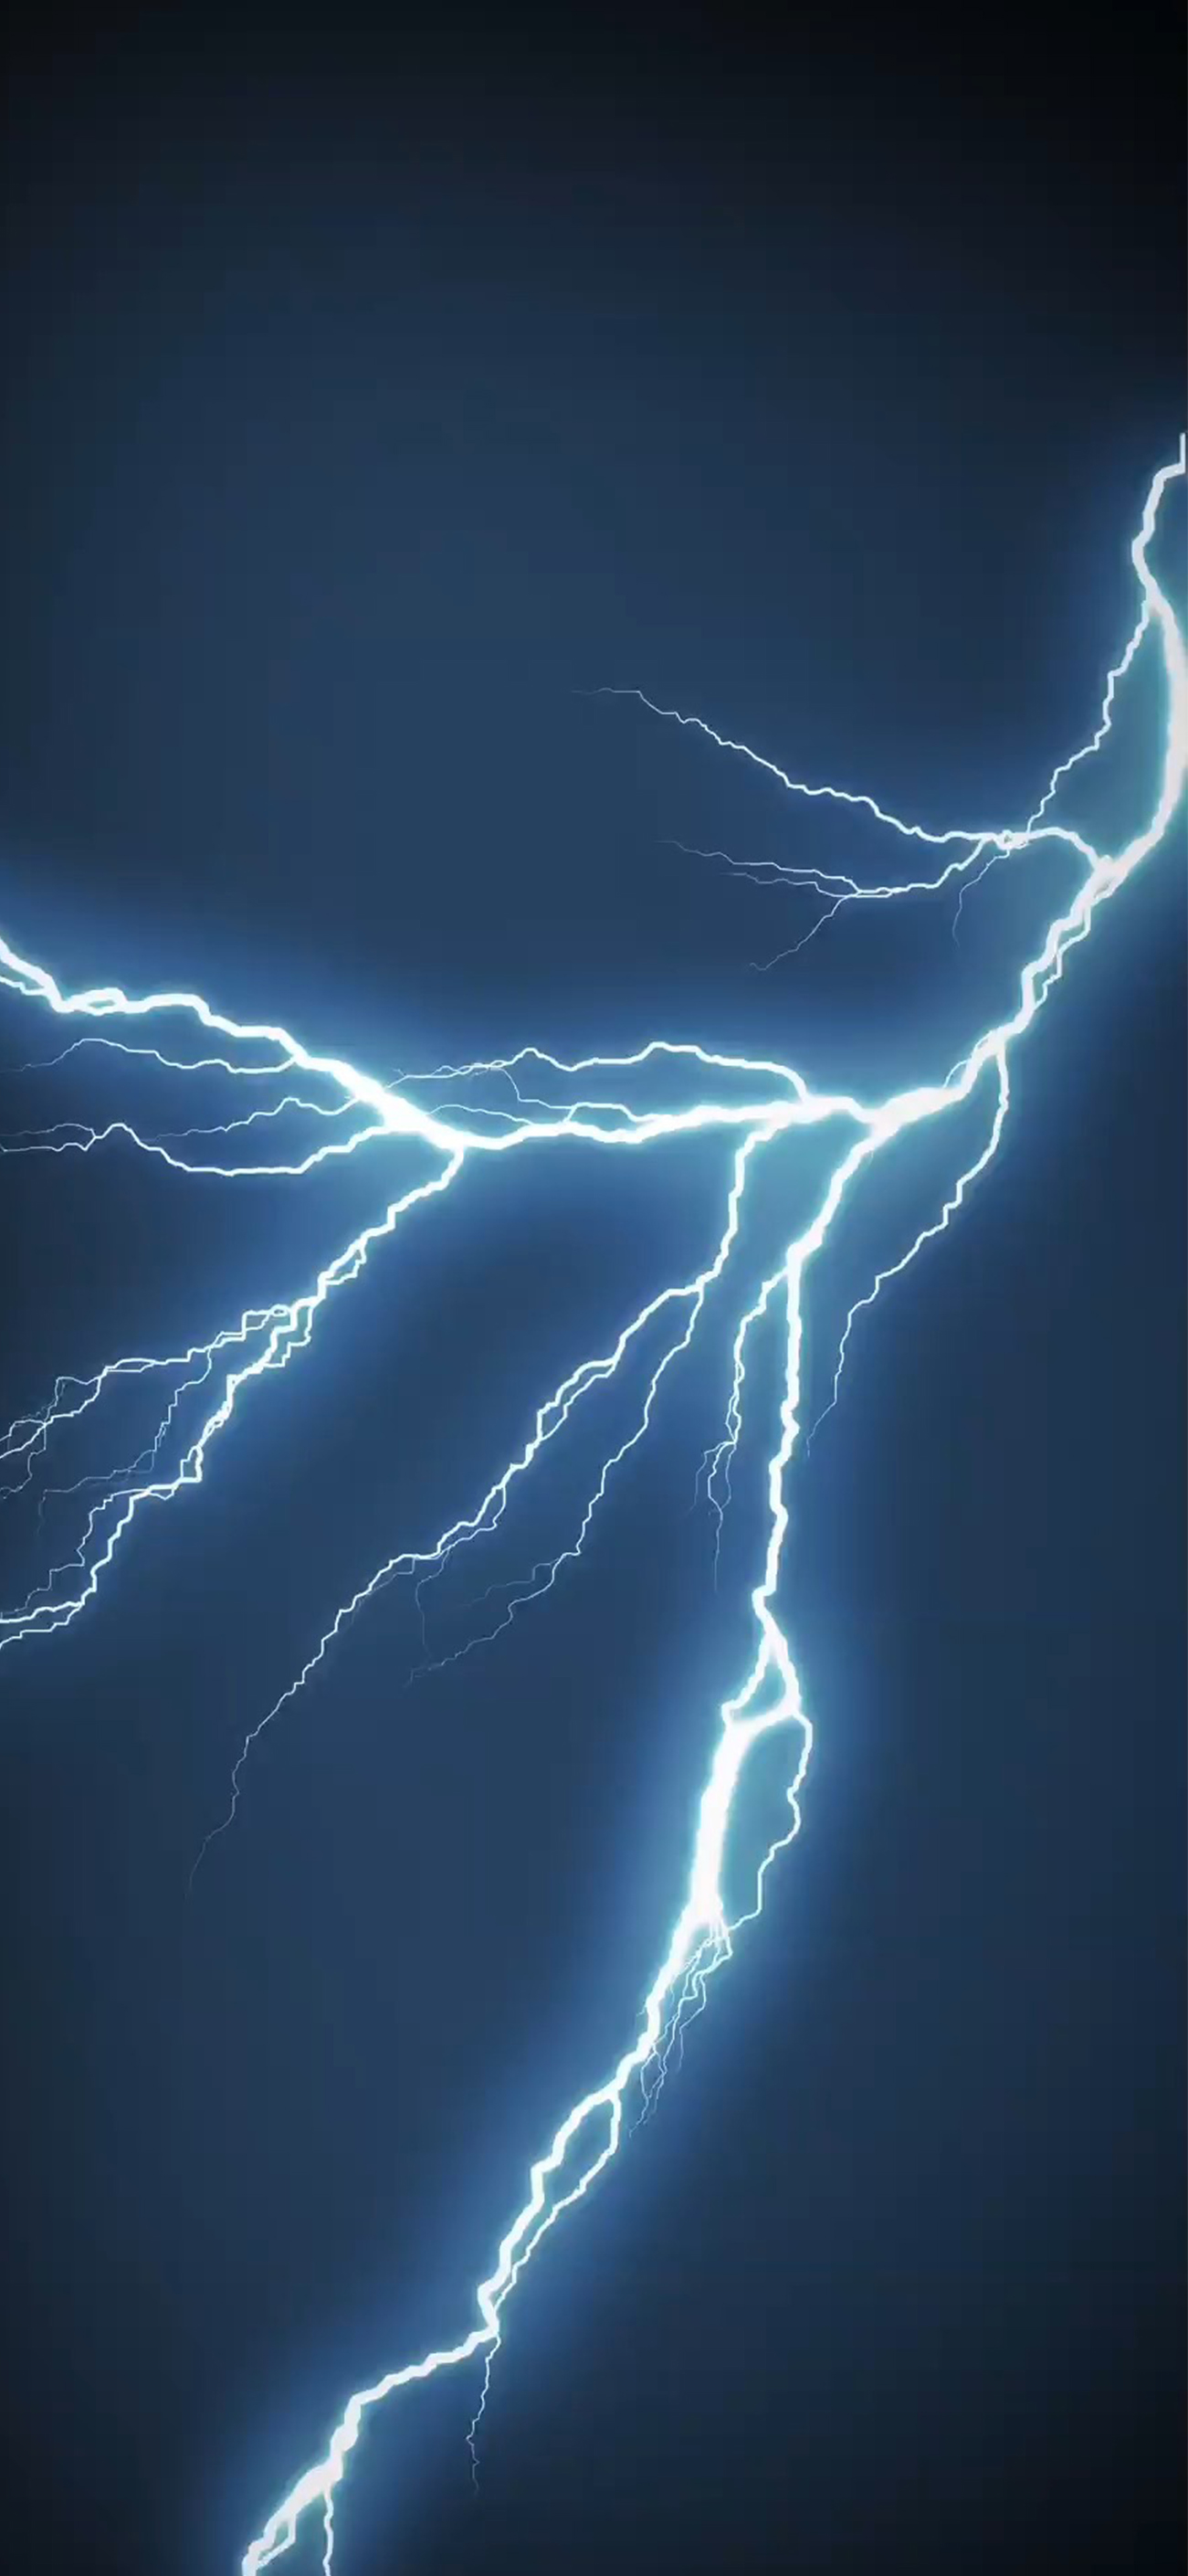 Thunder and Lightning - Wallpapers Central